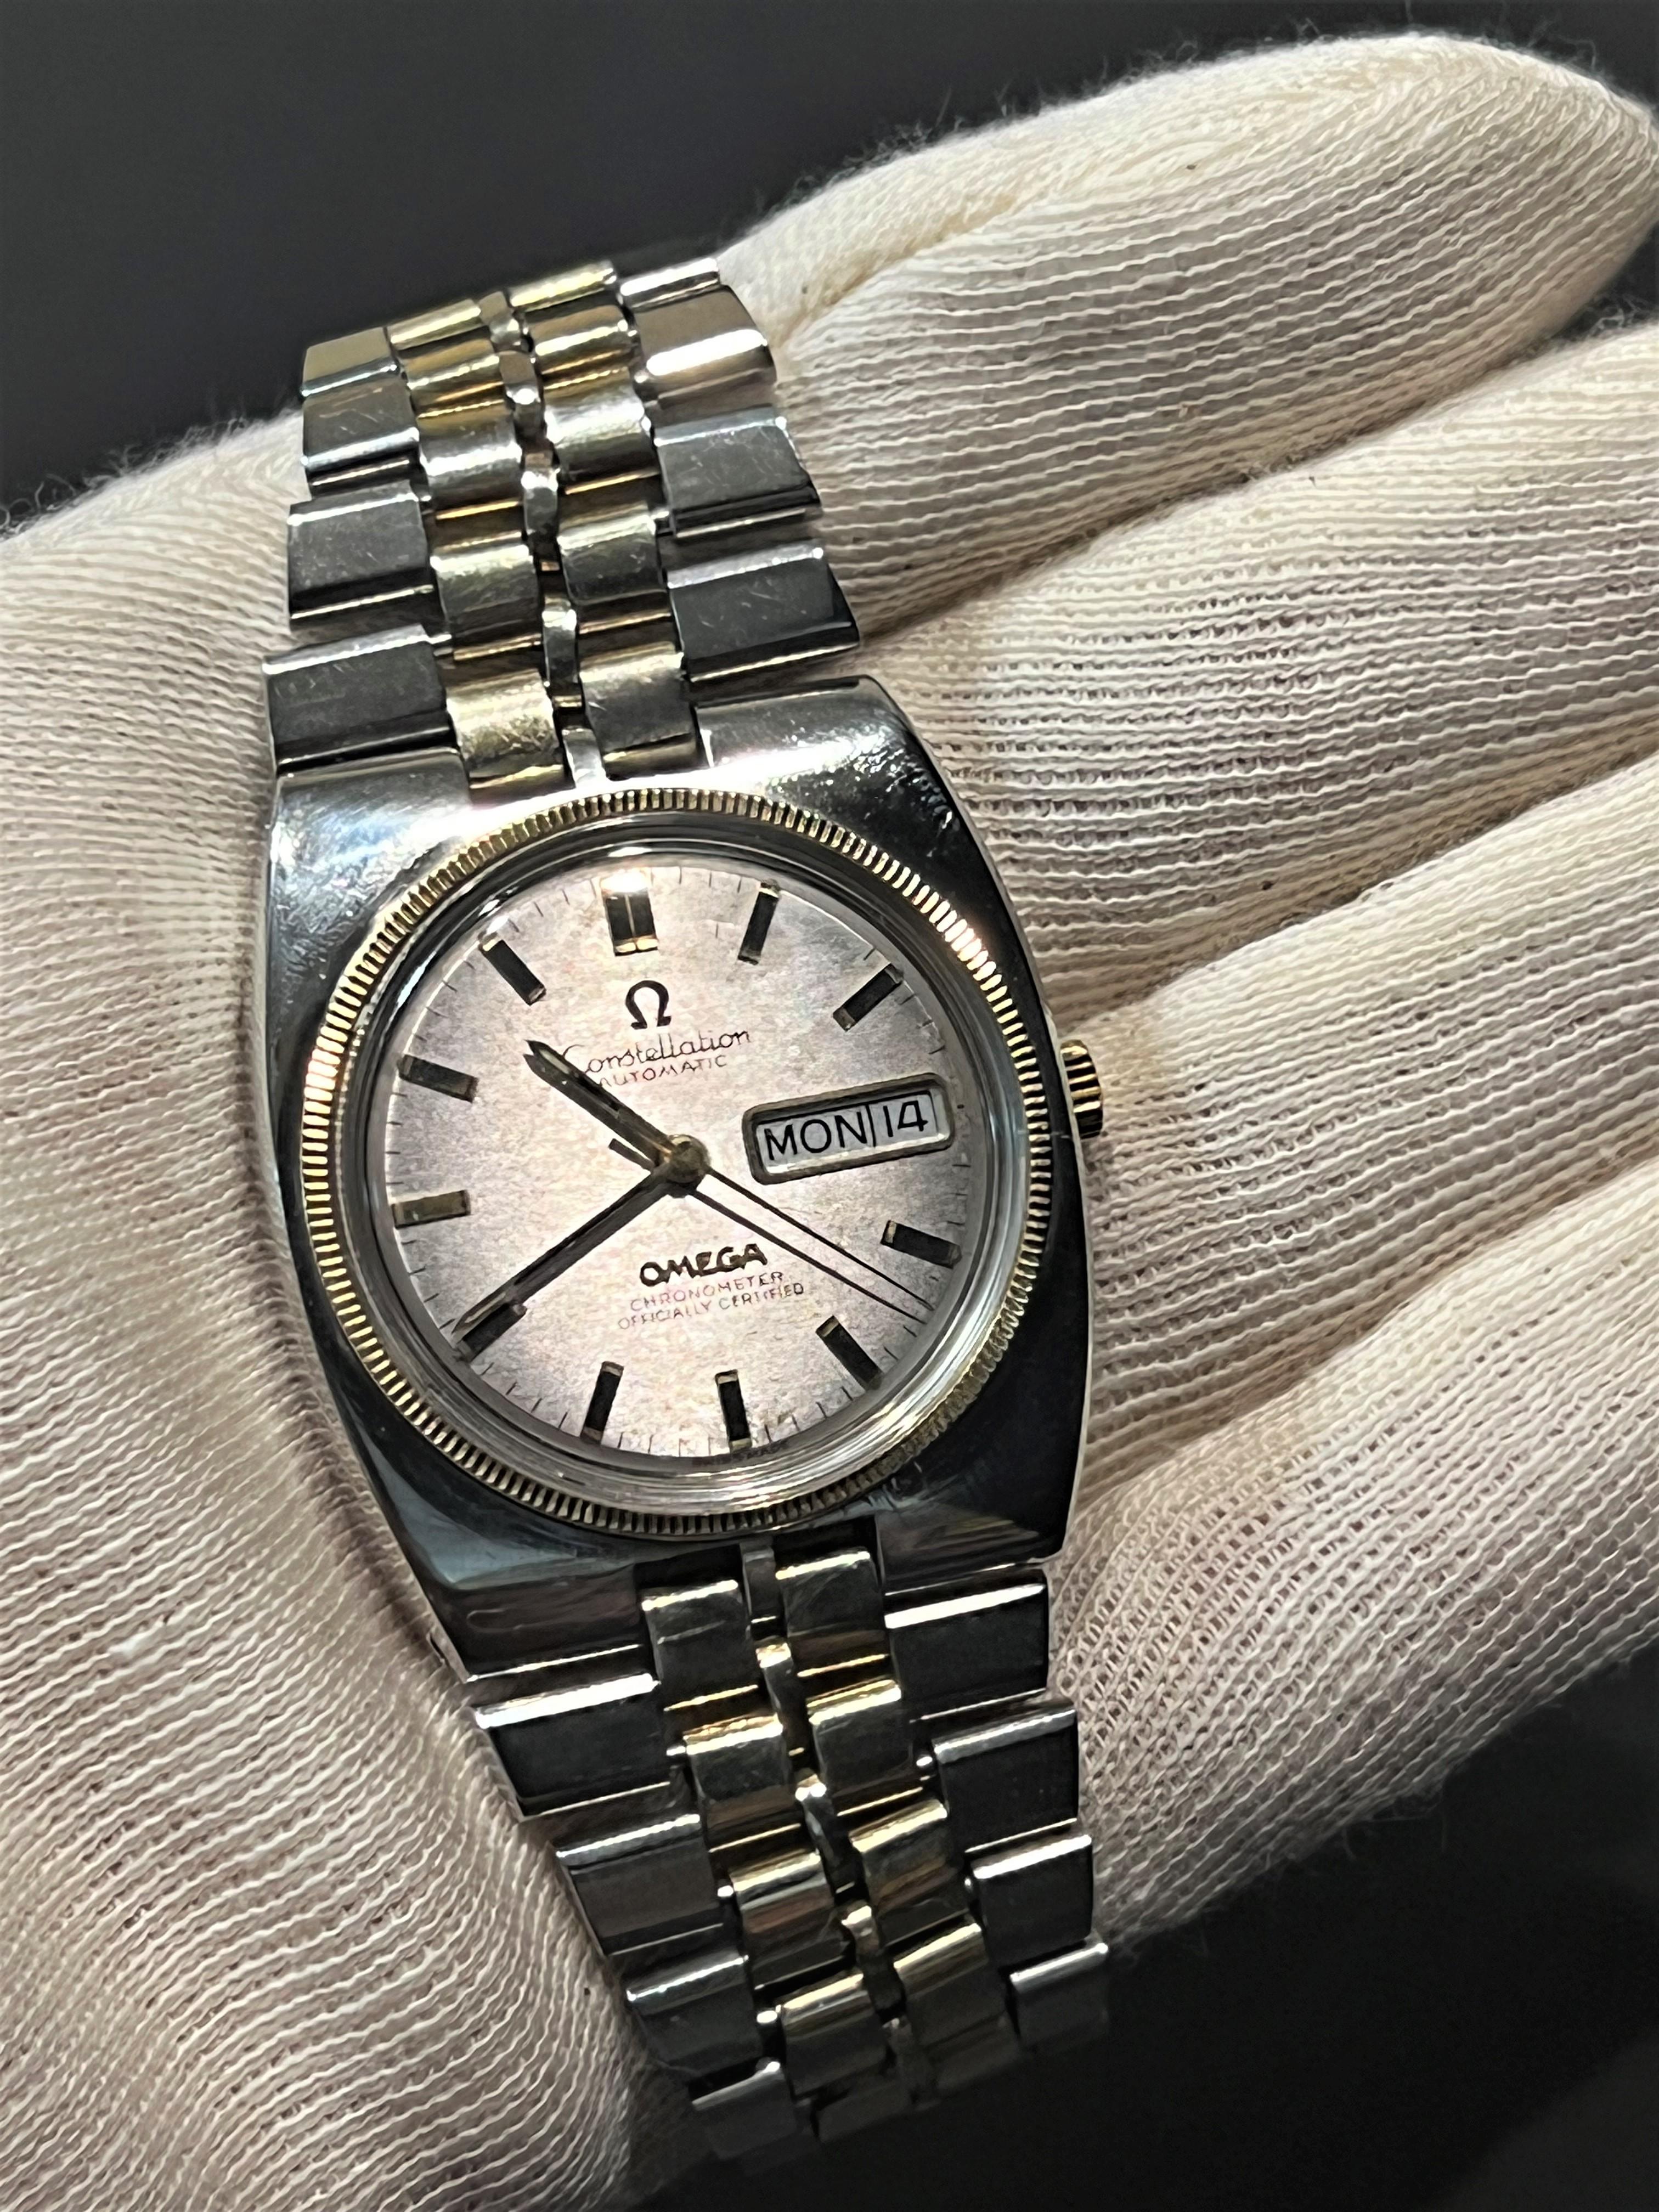 Day-Date Omega Constellation Chronometer Wristwatch For Sale 1